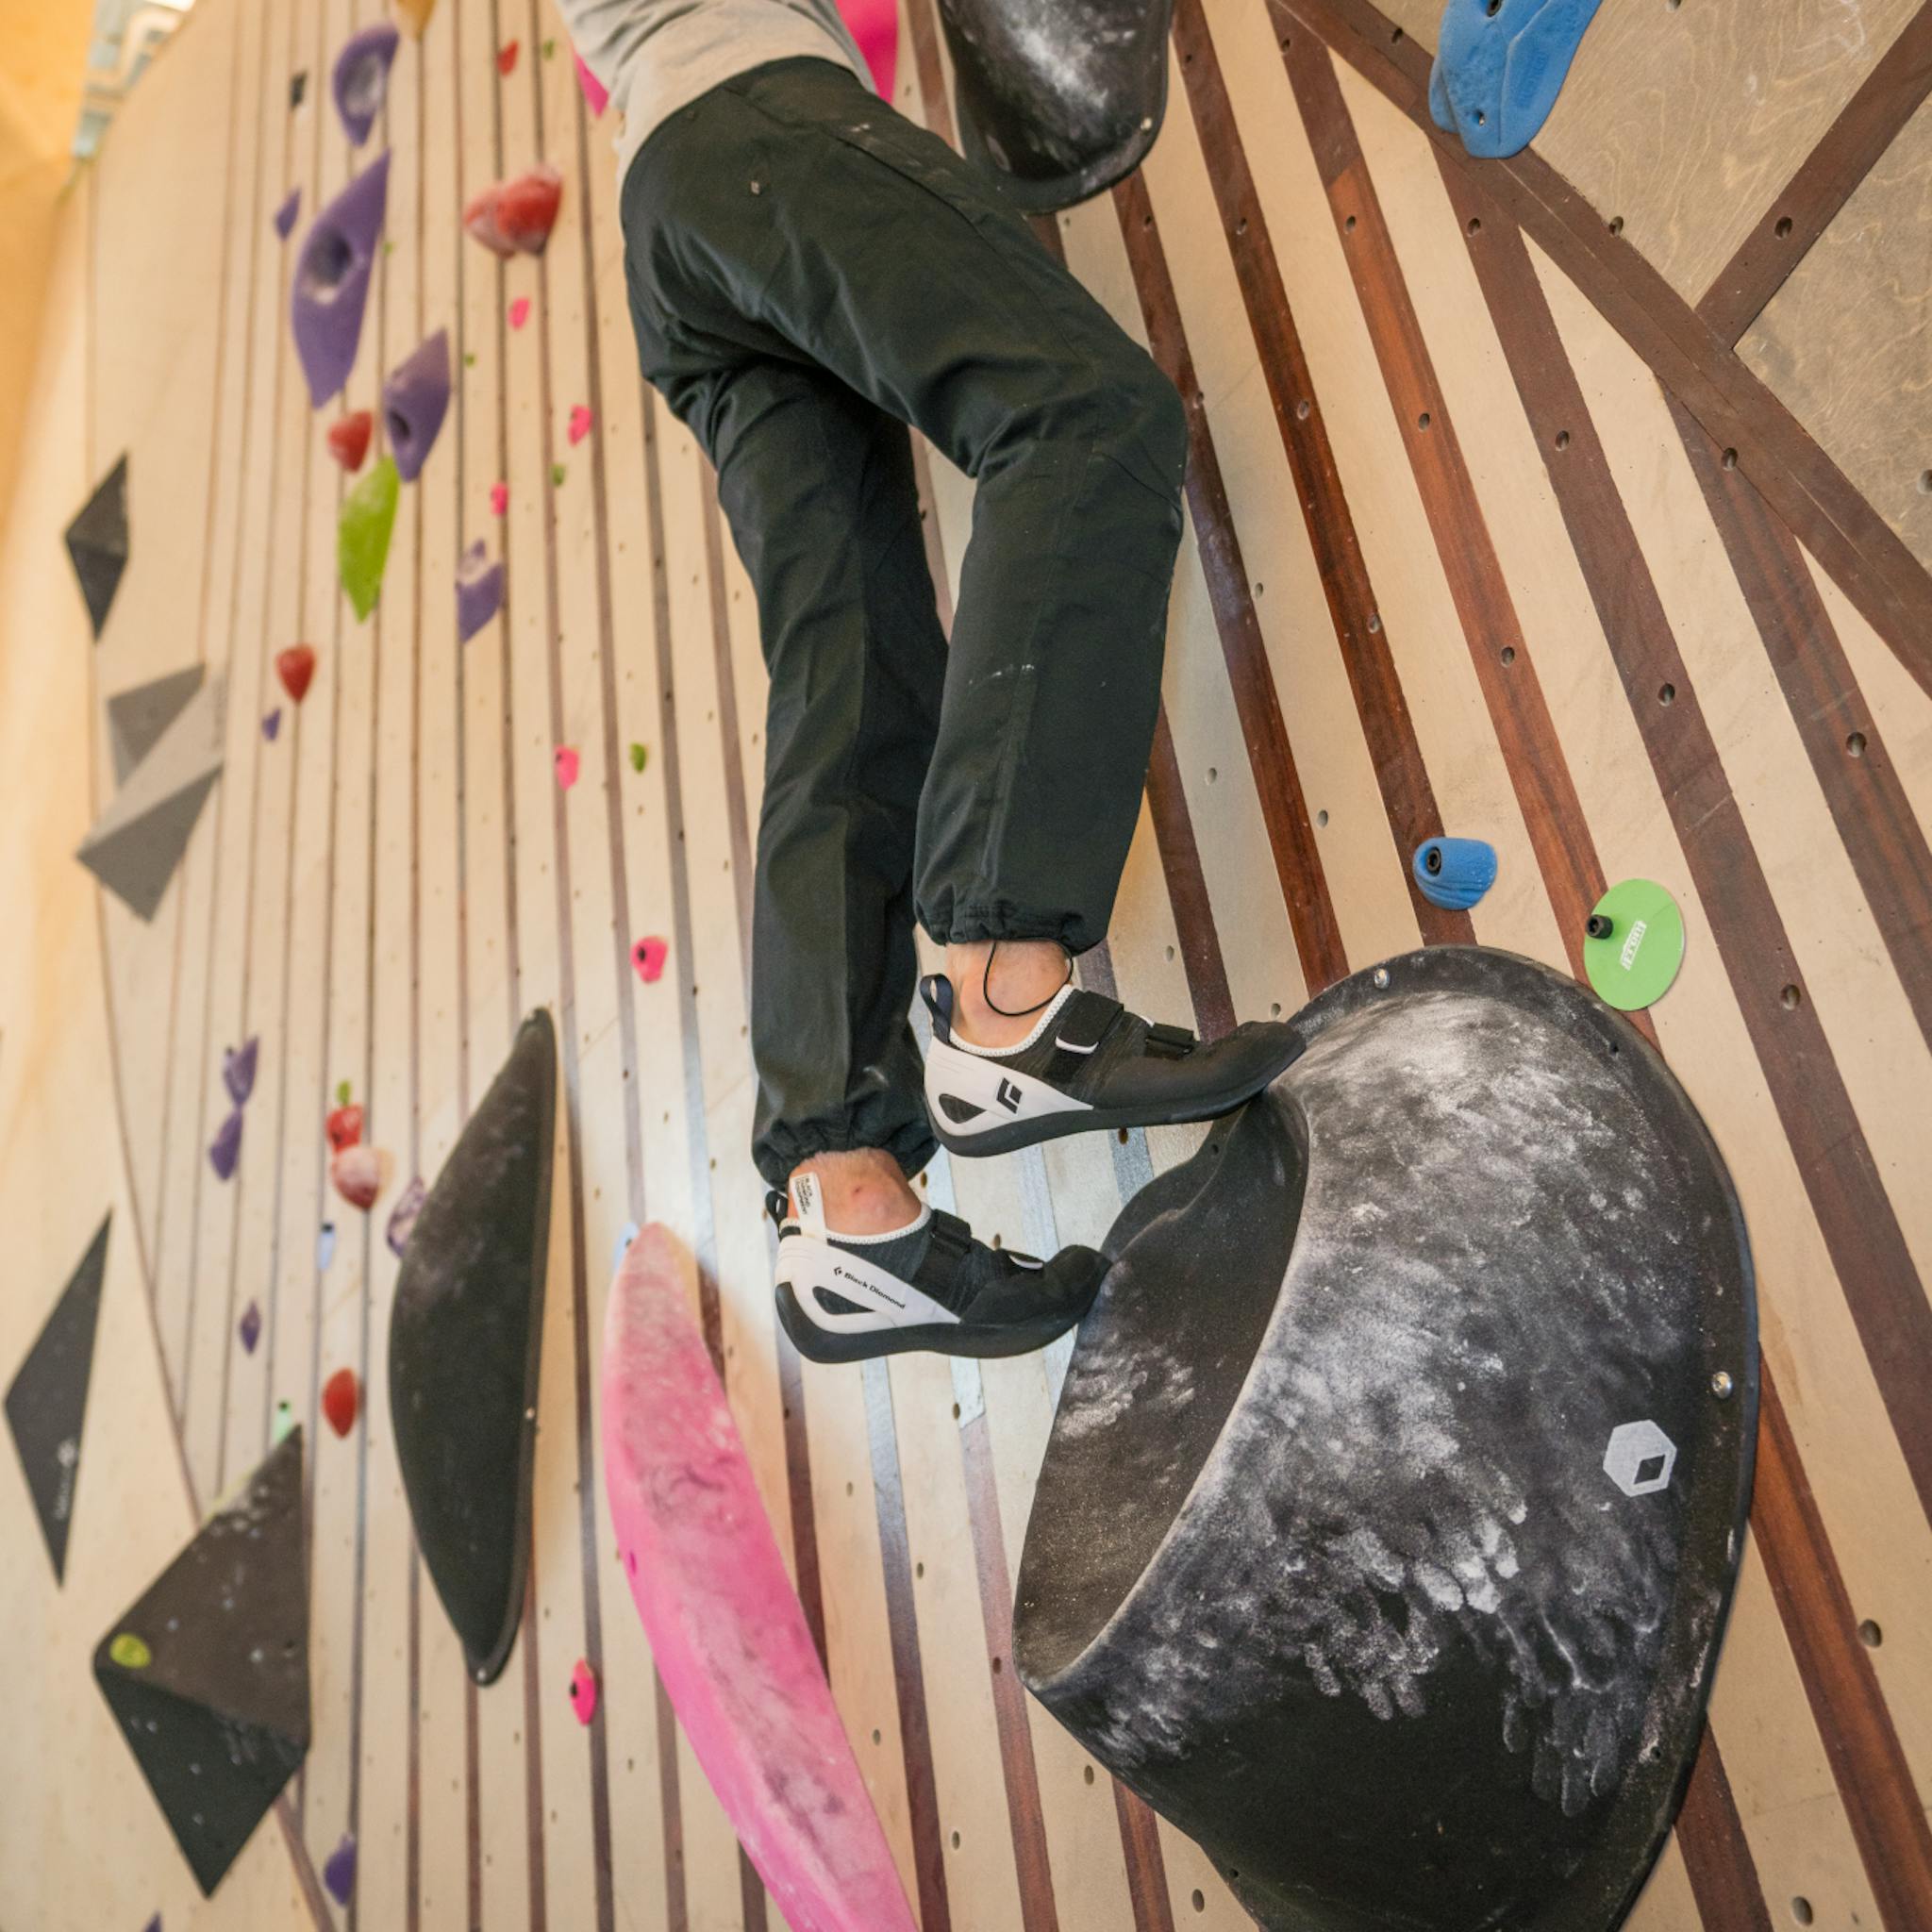 A climber works his way up a gym slab in Momentum Climbing Shoes.